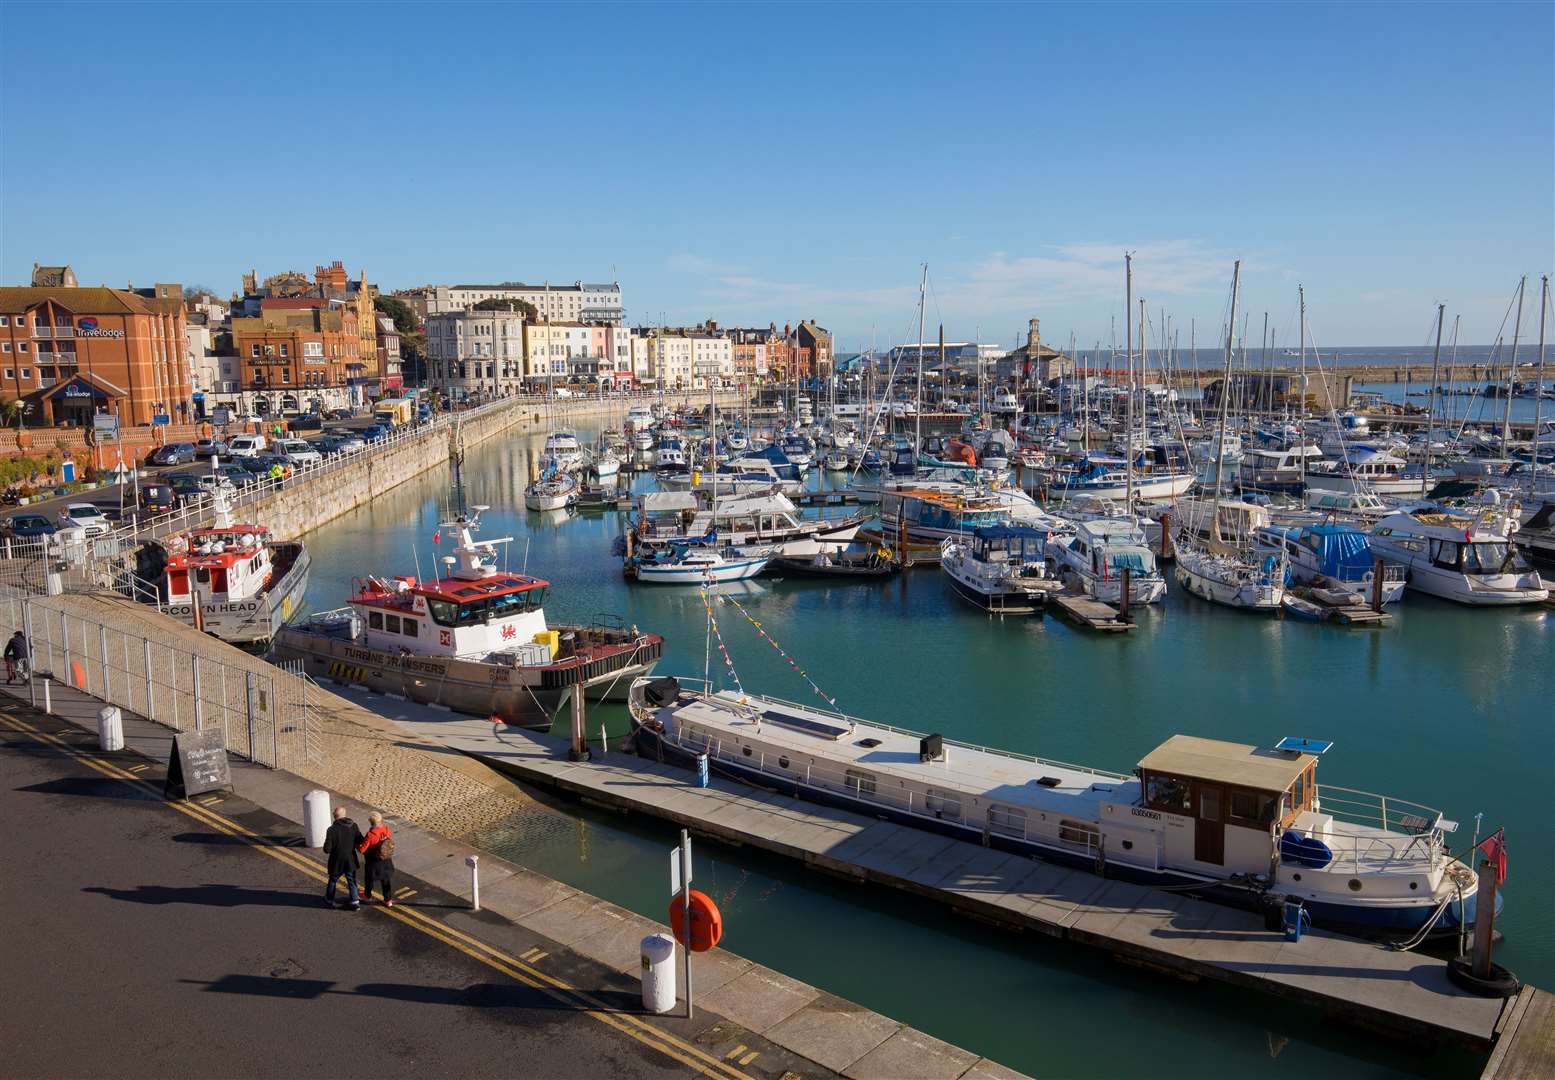 There is a disproportionate number of Airbnbs available to rent compared to homes in Ramsgate